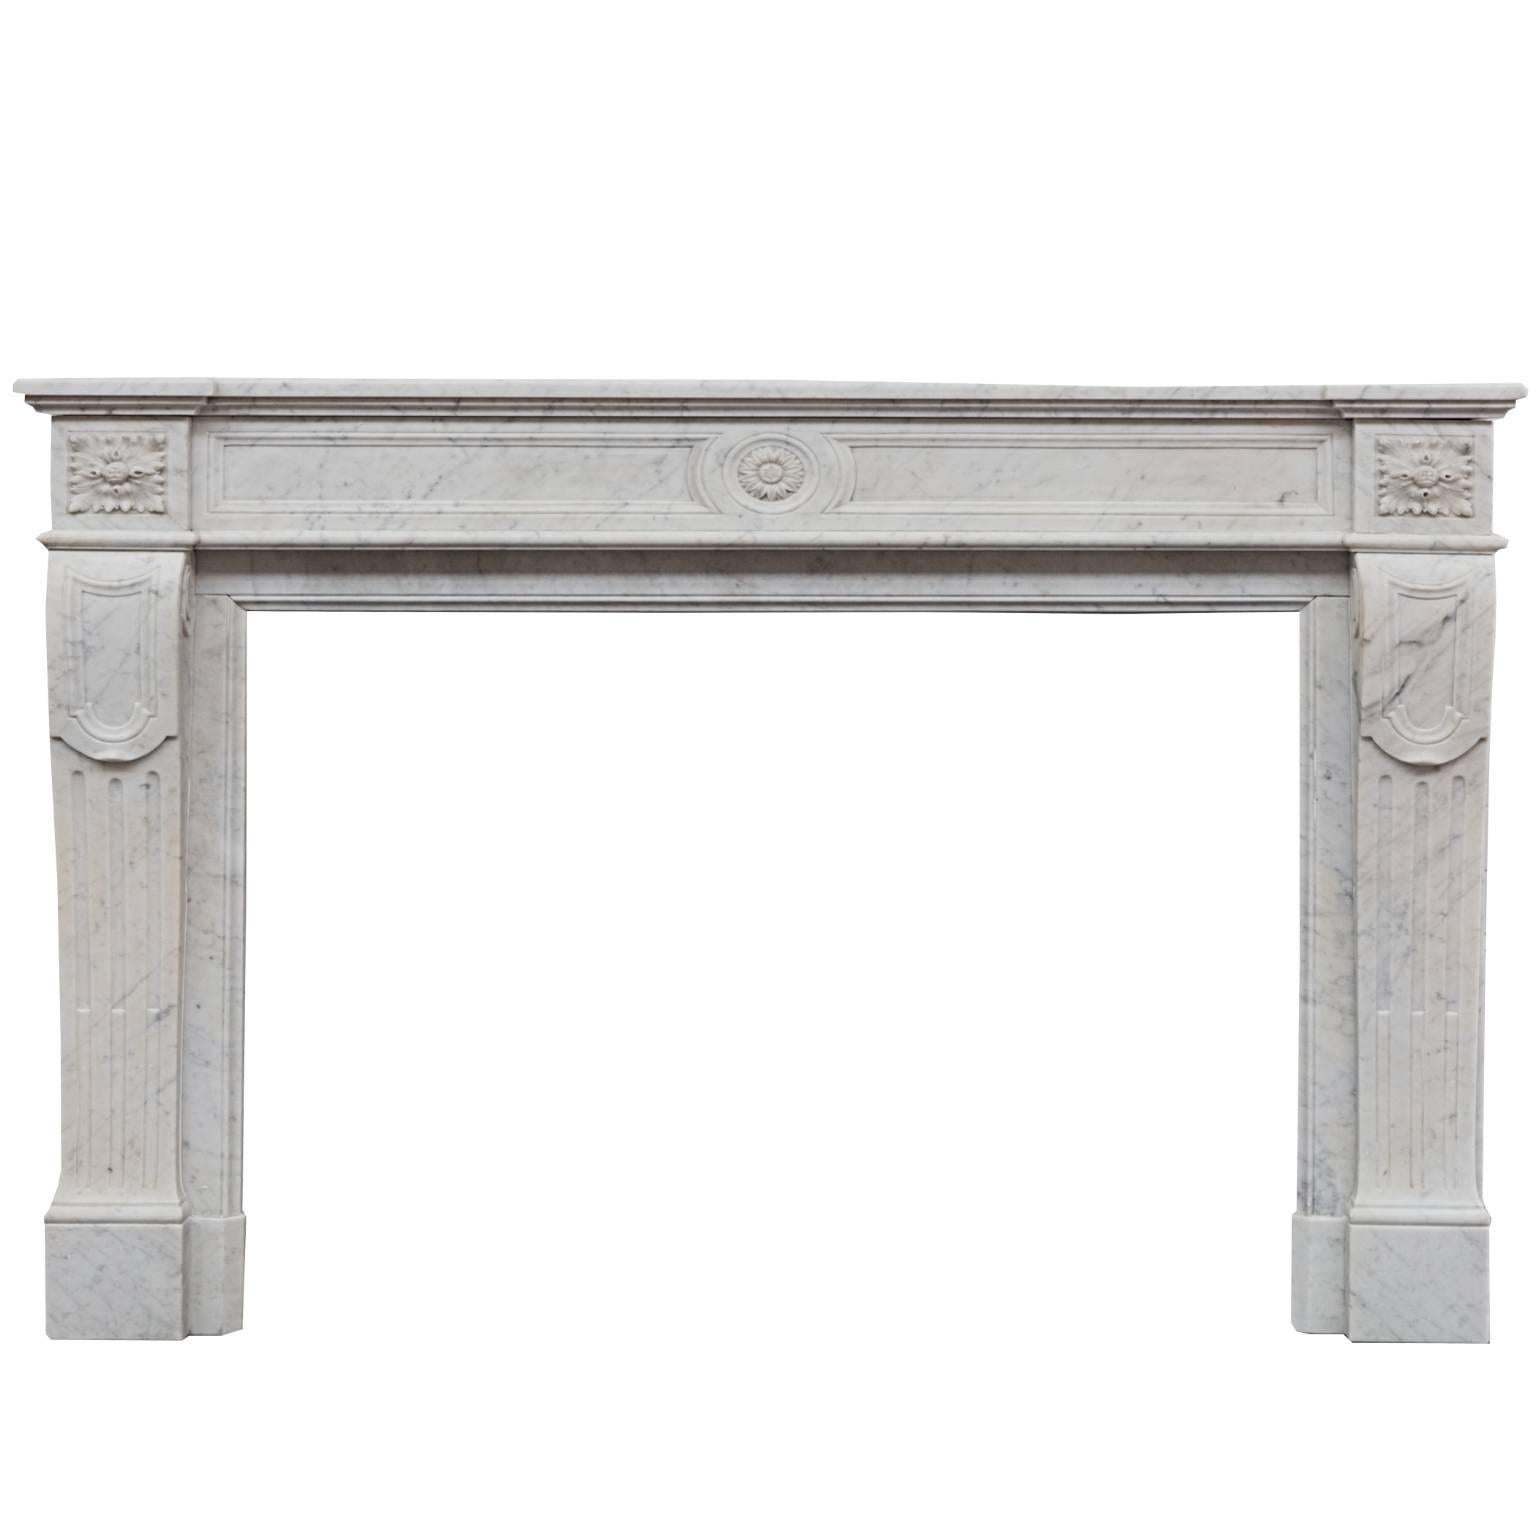 19th Century French Louis Philippe Cararra Marble Fireplace Mantelpiece